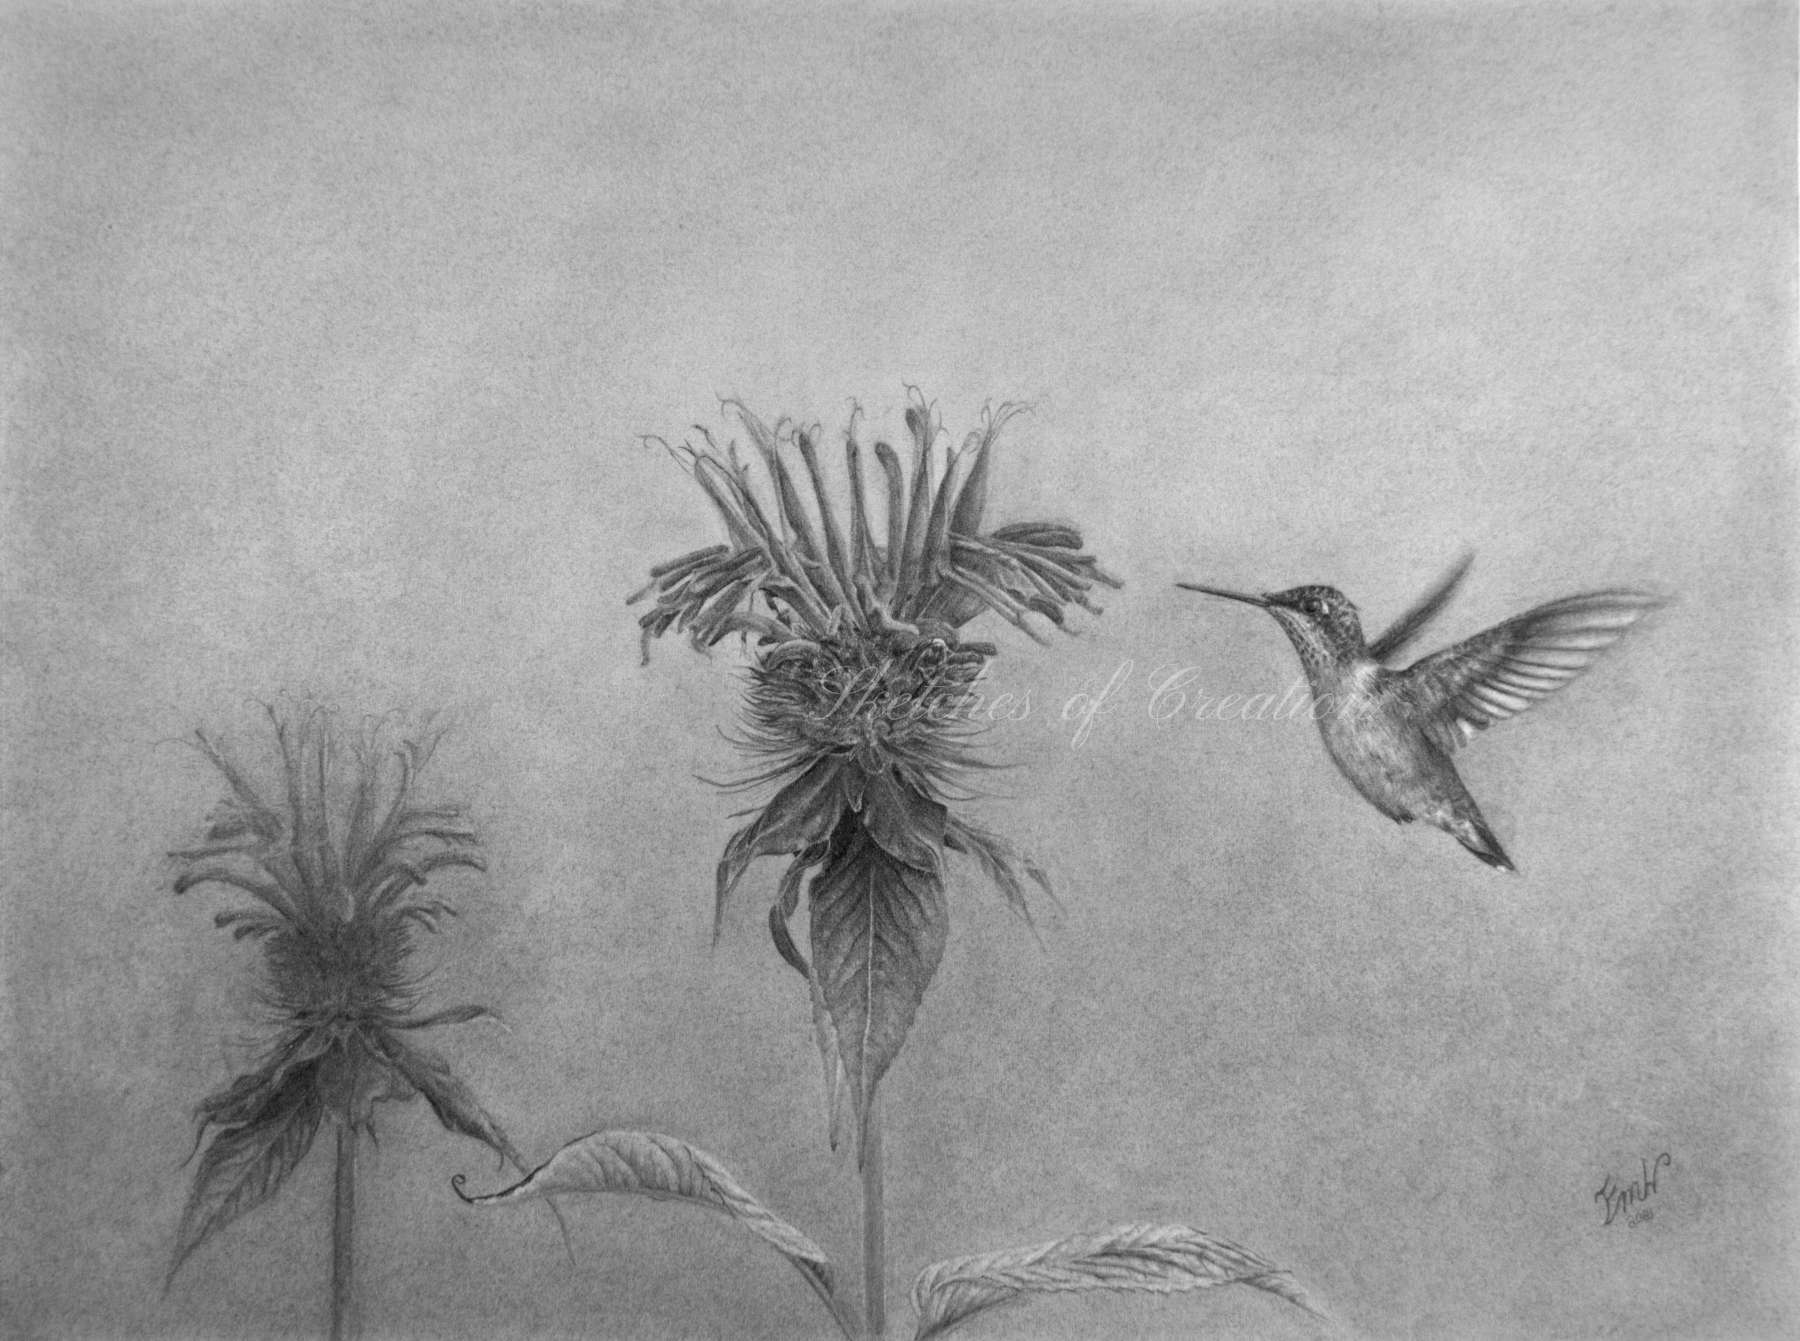 'Hummingbird with Beebalm' a drawing of a hummingbird flying next to a beebalm flower. Completed August 2021